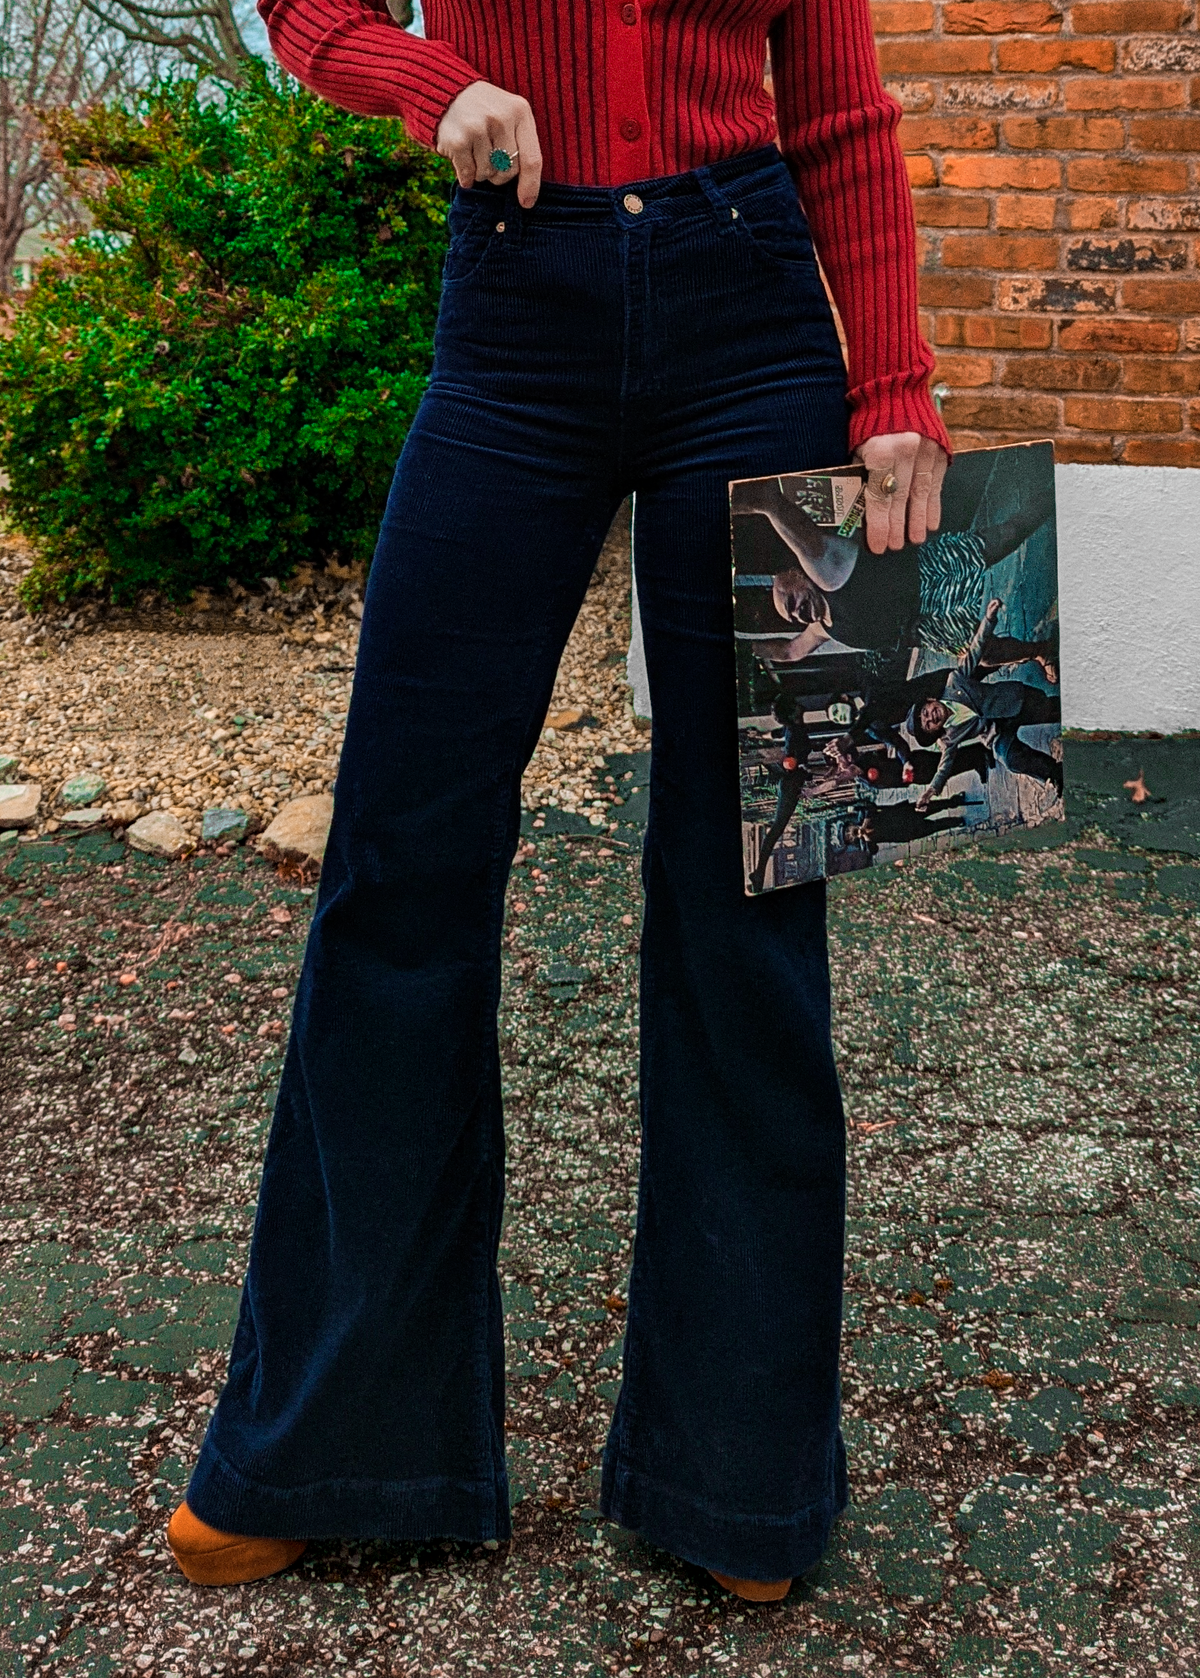 Rolla's Jeans Midnight Navy Corduroy Flares. 70s inspired bell bottoms with a high rise waist, velvety wide wale corduroy, and a flare leg